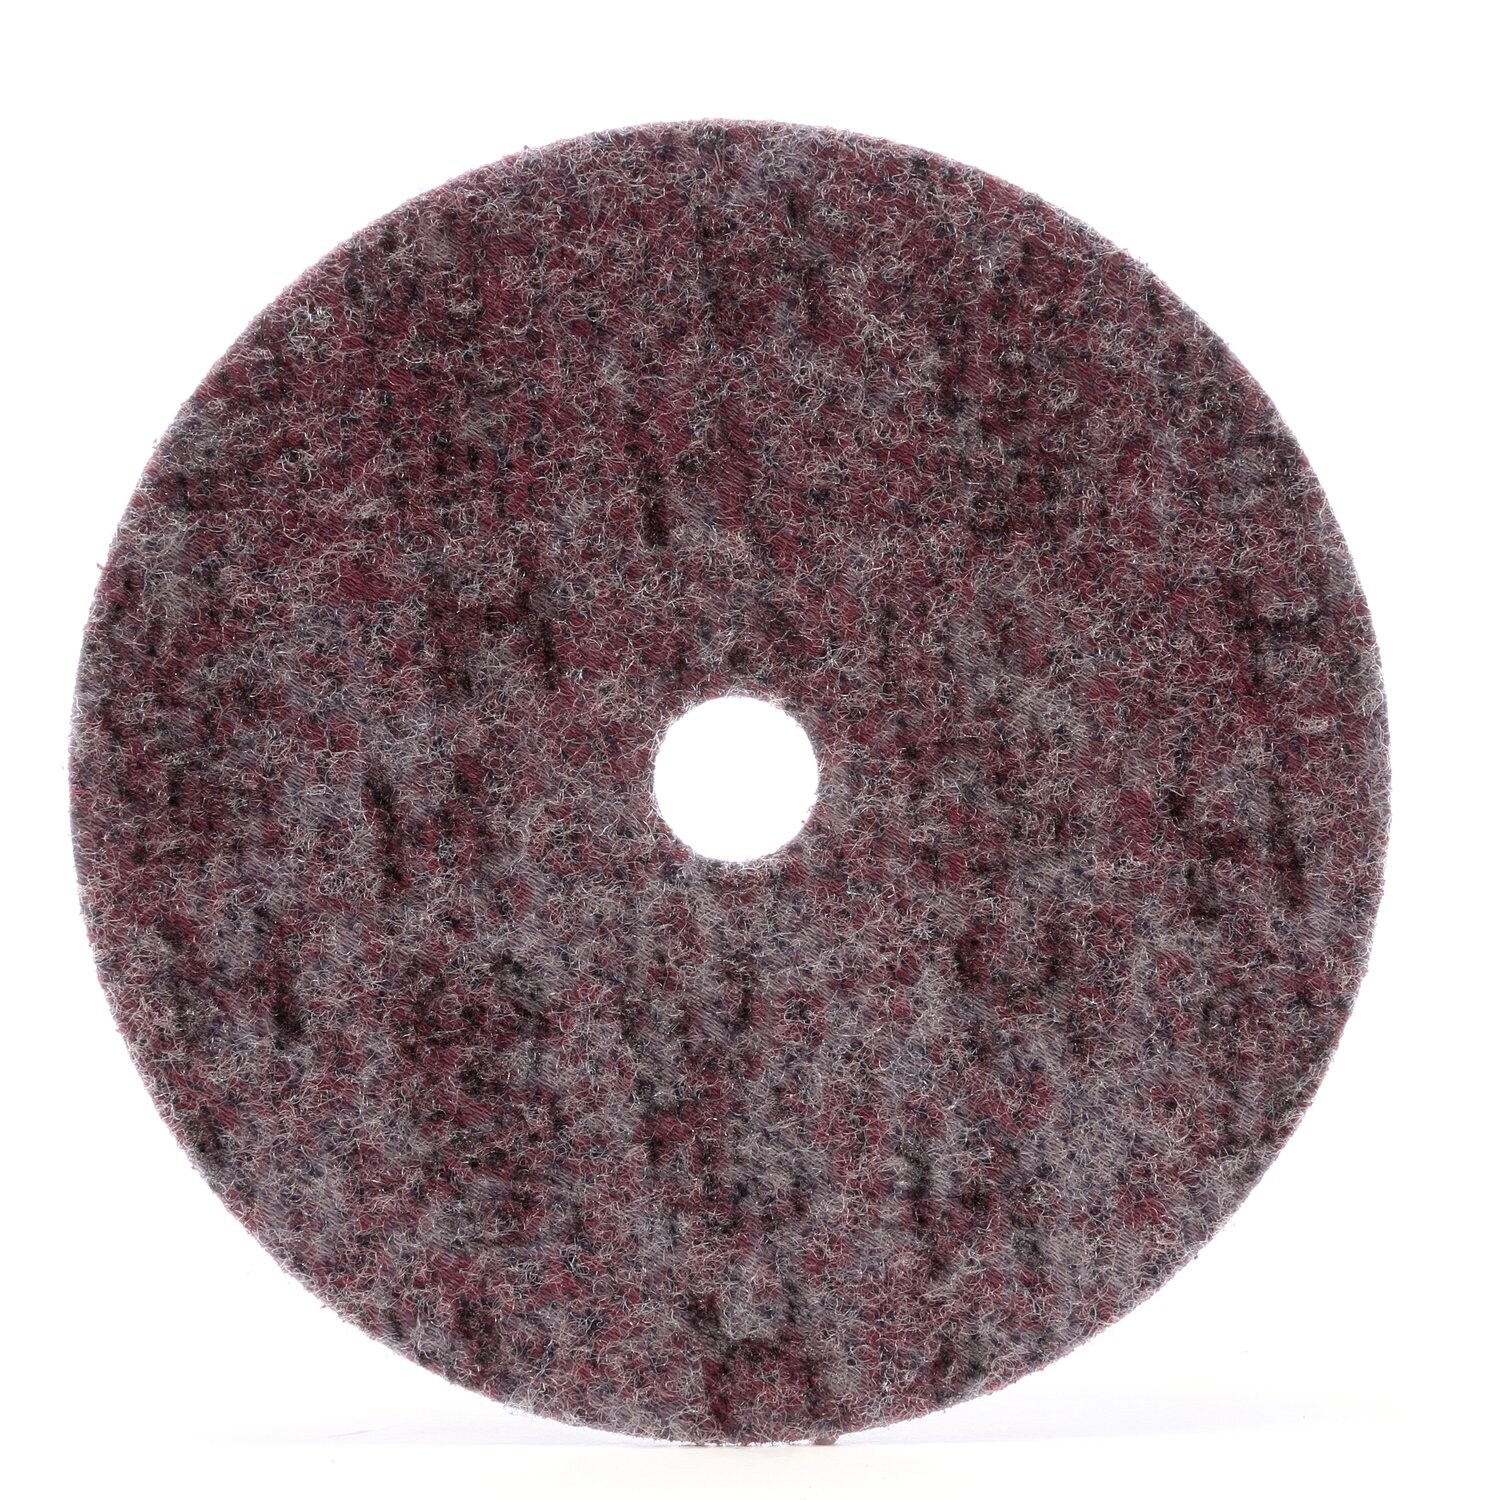 7000046249 - Scotch-Brite Light Grinding and Blending Disc, GB-DH, Heavy Duty A
Coarse, 7 in x 7/8 in, 25 ea/Case